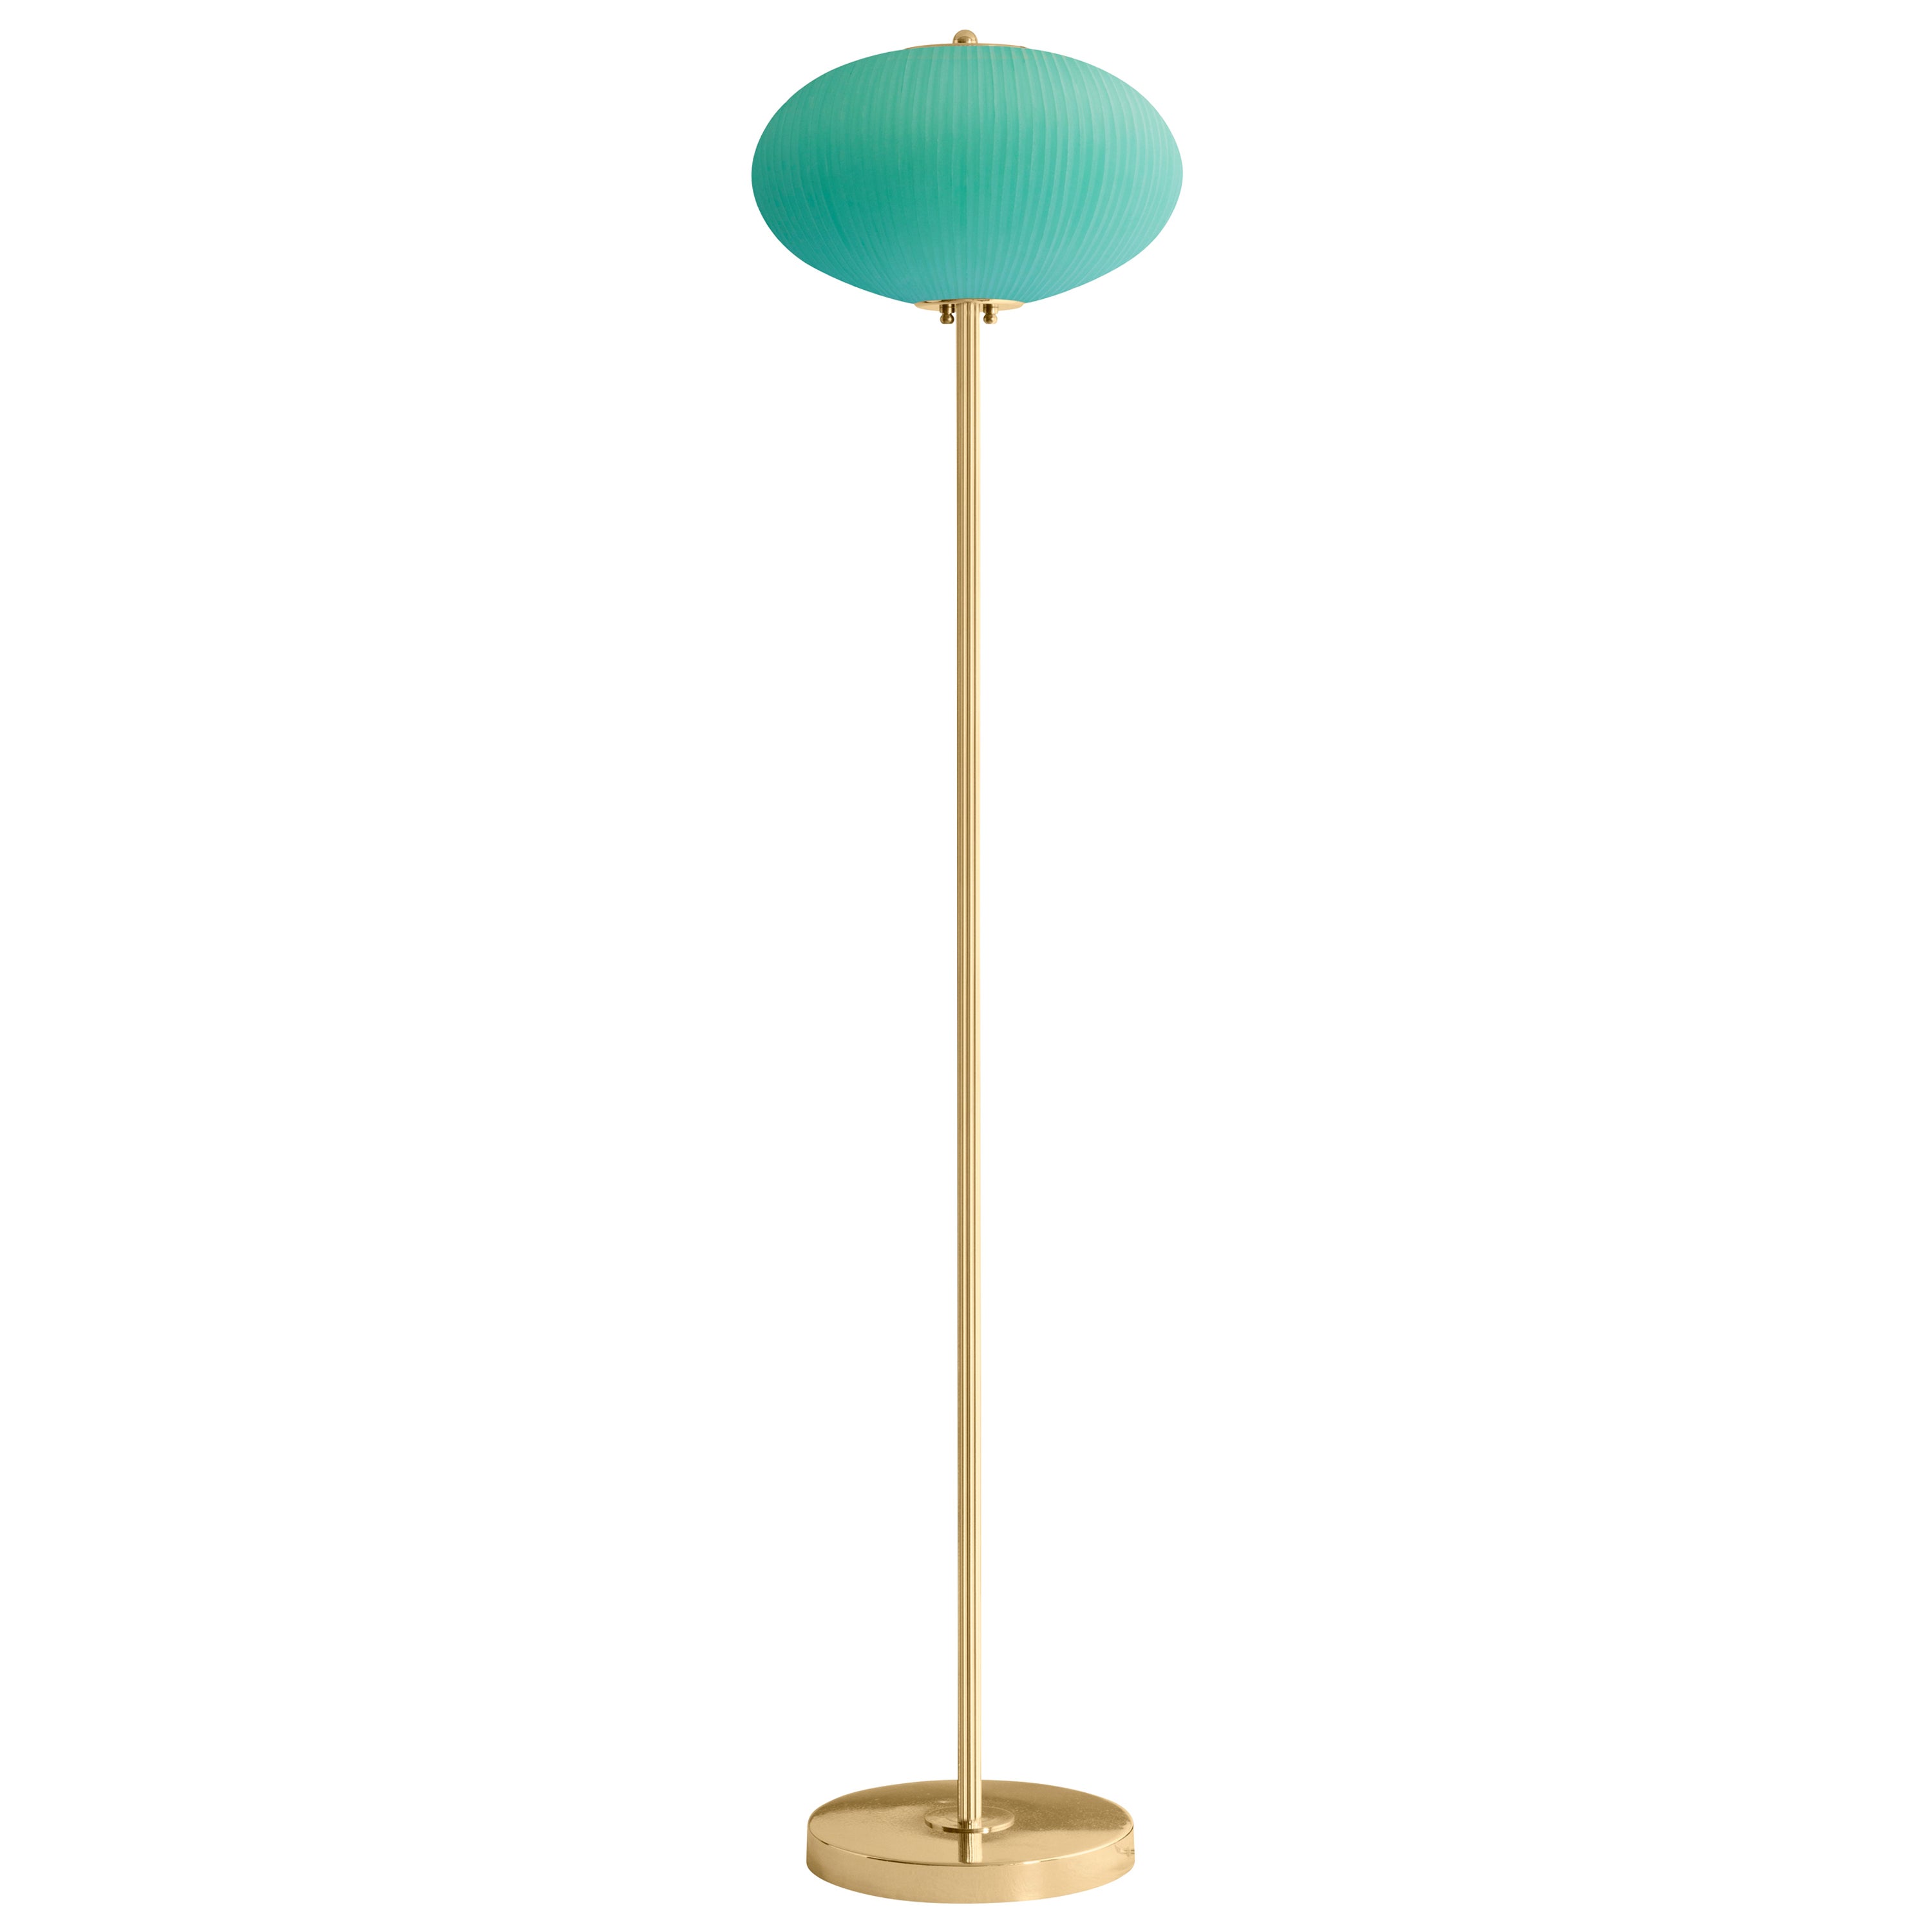 Set of 2 floor lamp China 07 by Magic Circus Editions
Dimensions: H 150 x W 32 x D 32 cm, also available in H 140, 160
Materials: Brass, mouth blown glass sculpted with a diamond saw
Colour: jade green

Available finishes: brass,